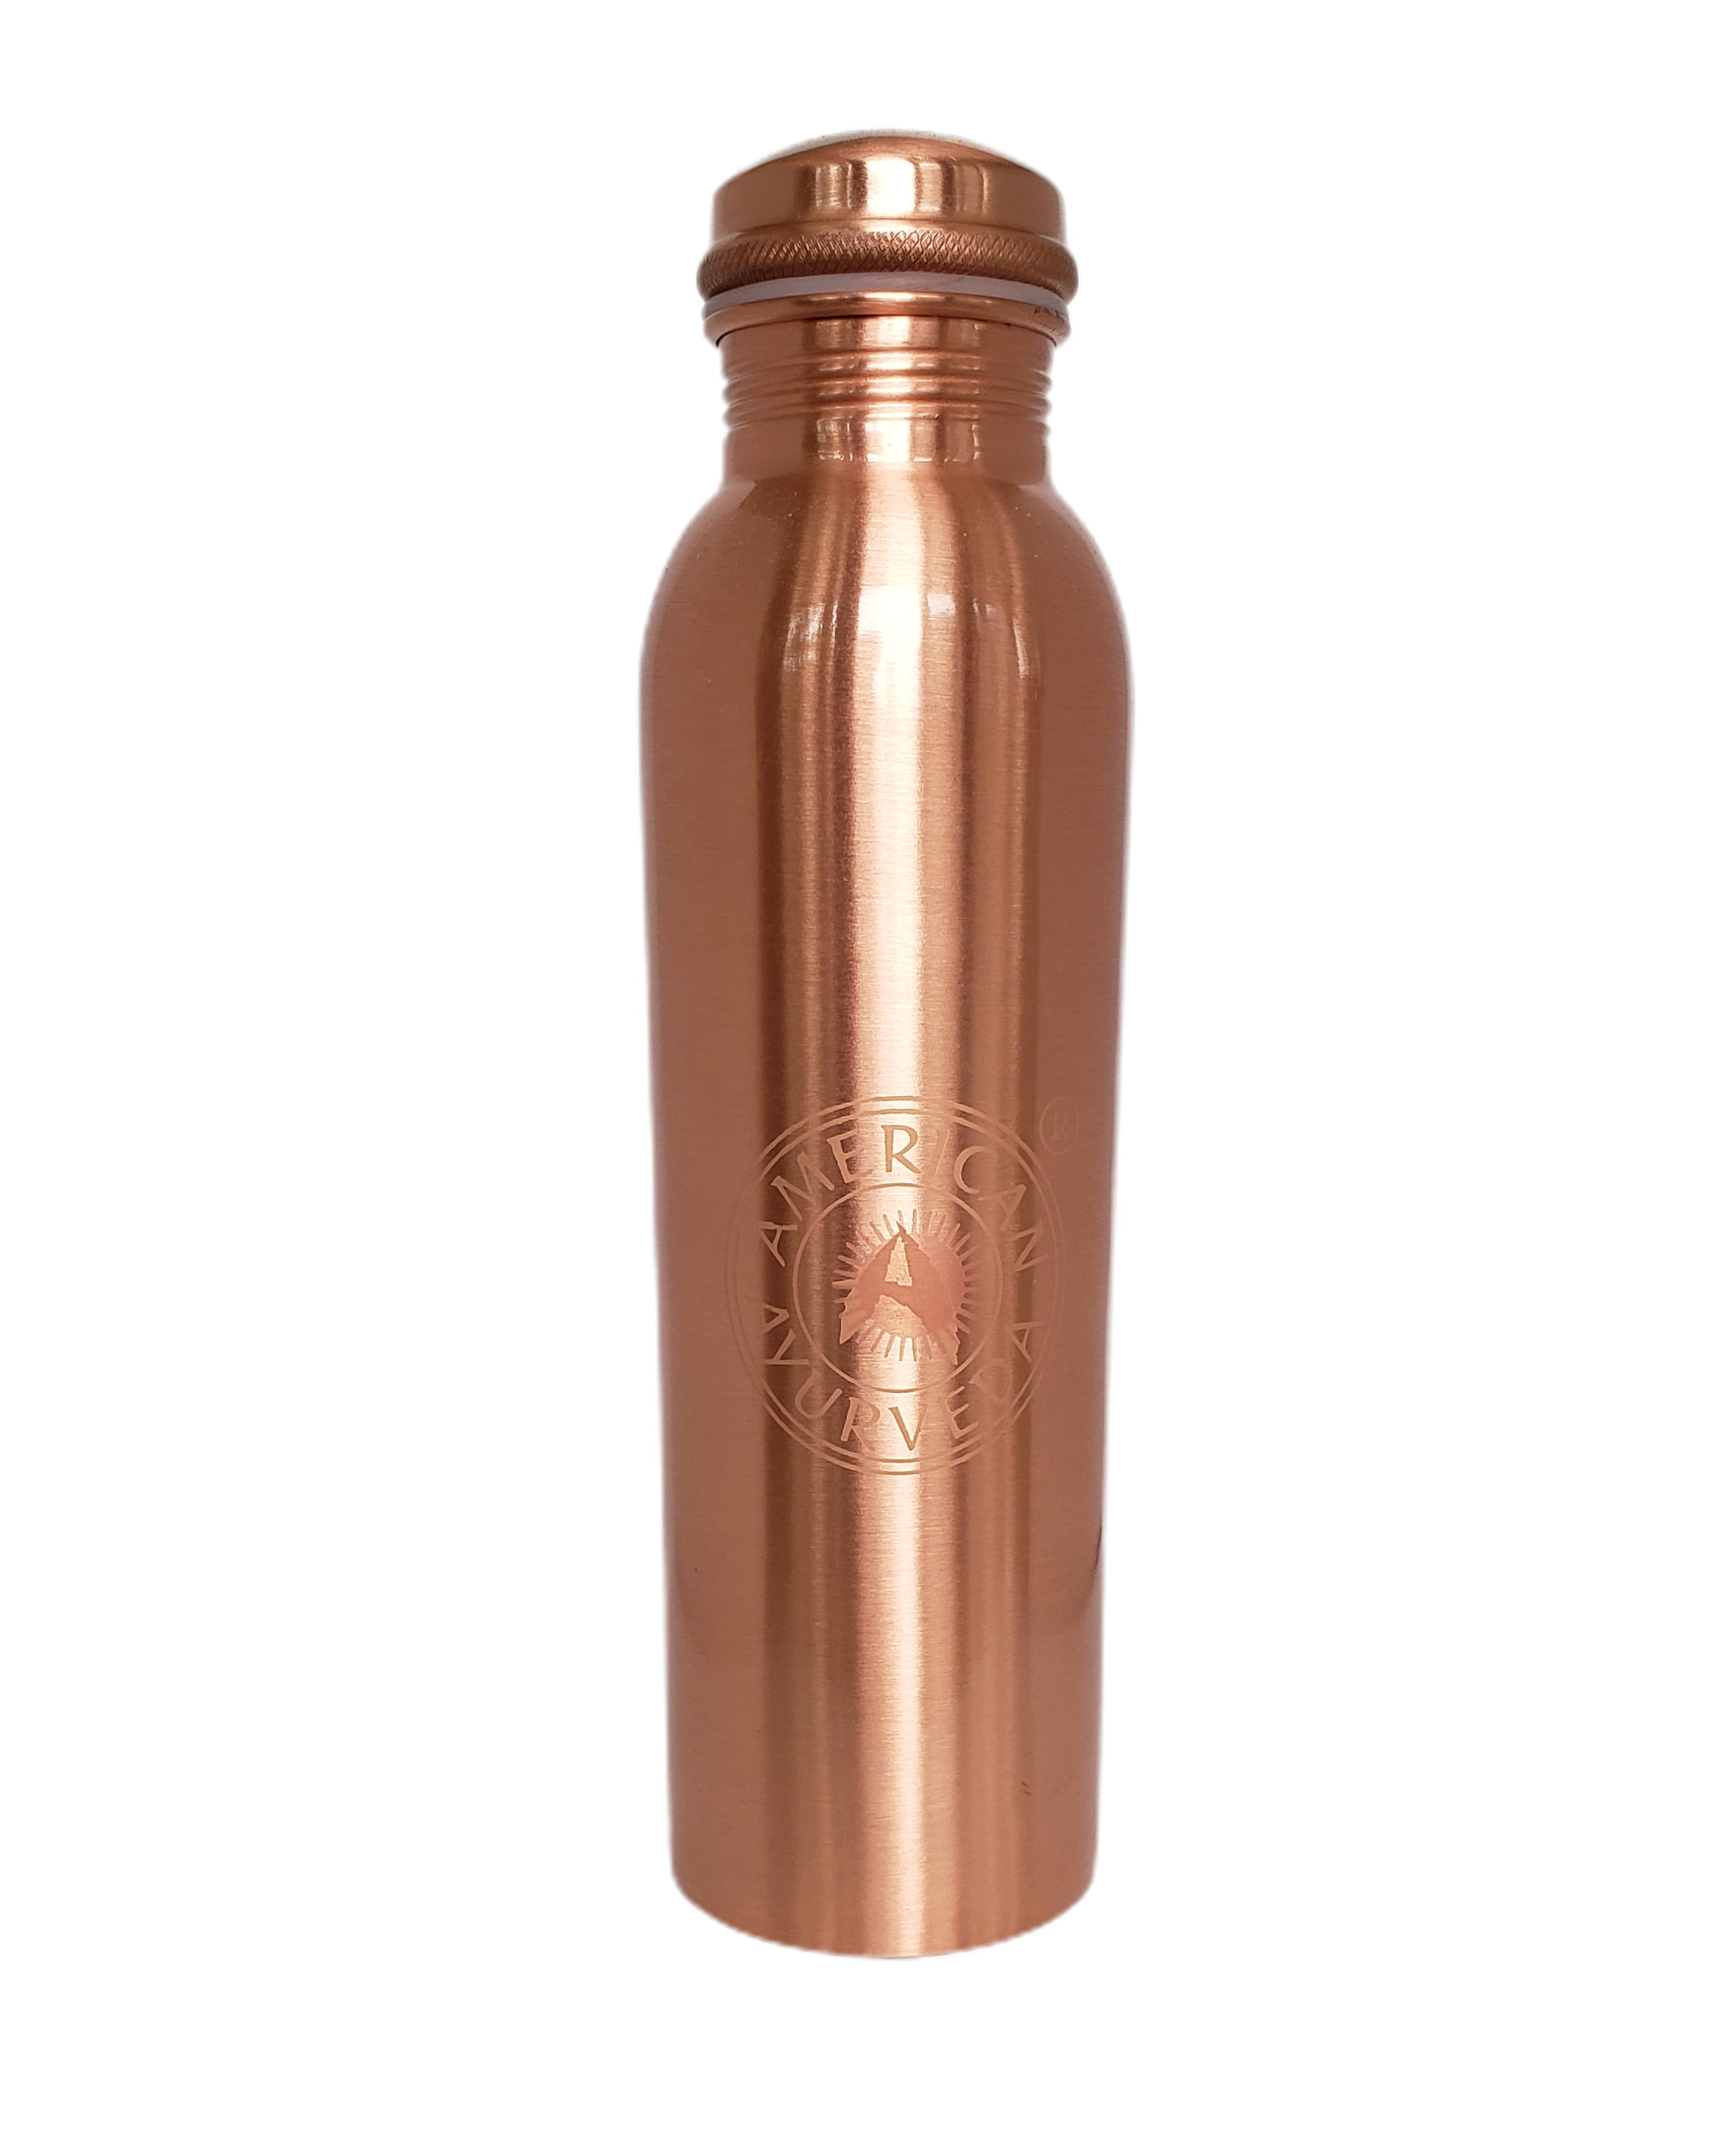 100% Pure Hammered Copper Water Bottle For Yoga Ayurveda Health Benefits 950 ml 